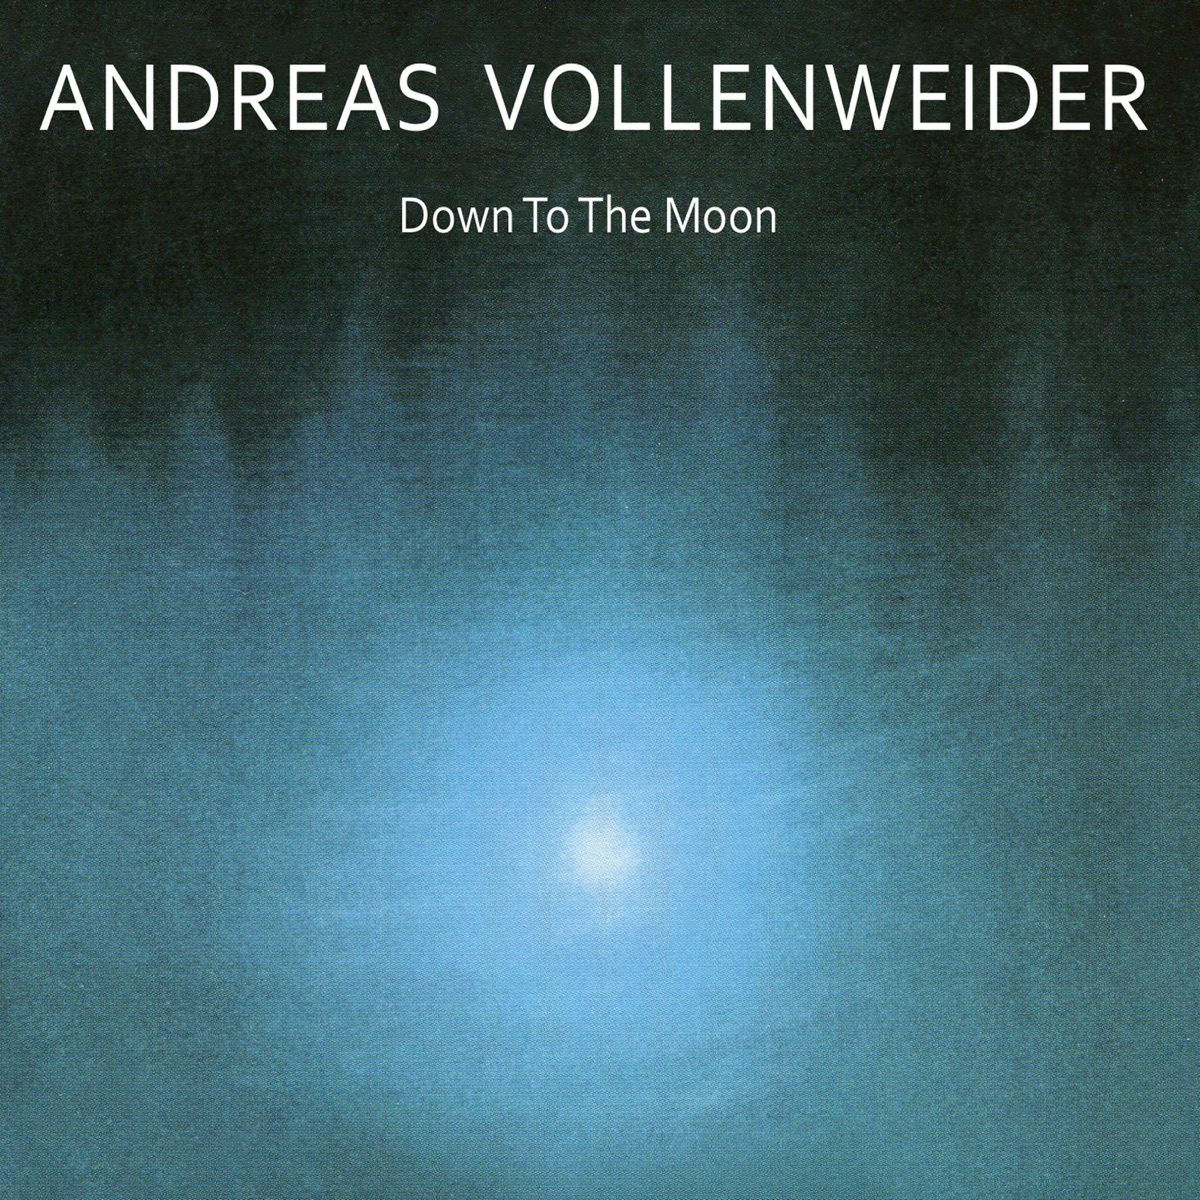 Book of Roses by Andreas Vollenweider on Apple Music